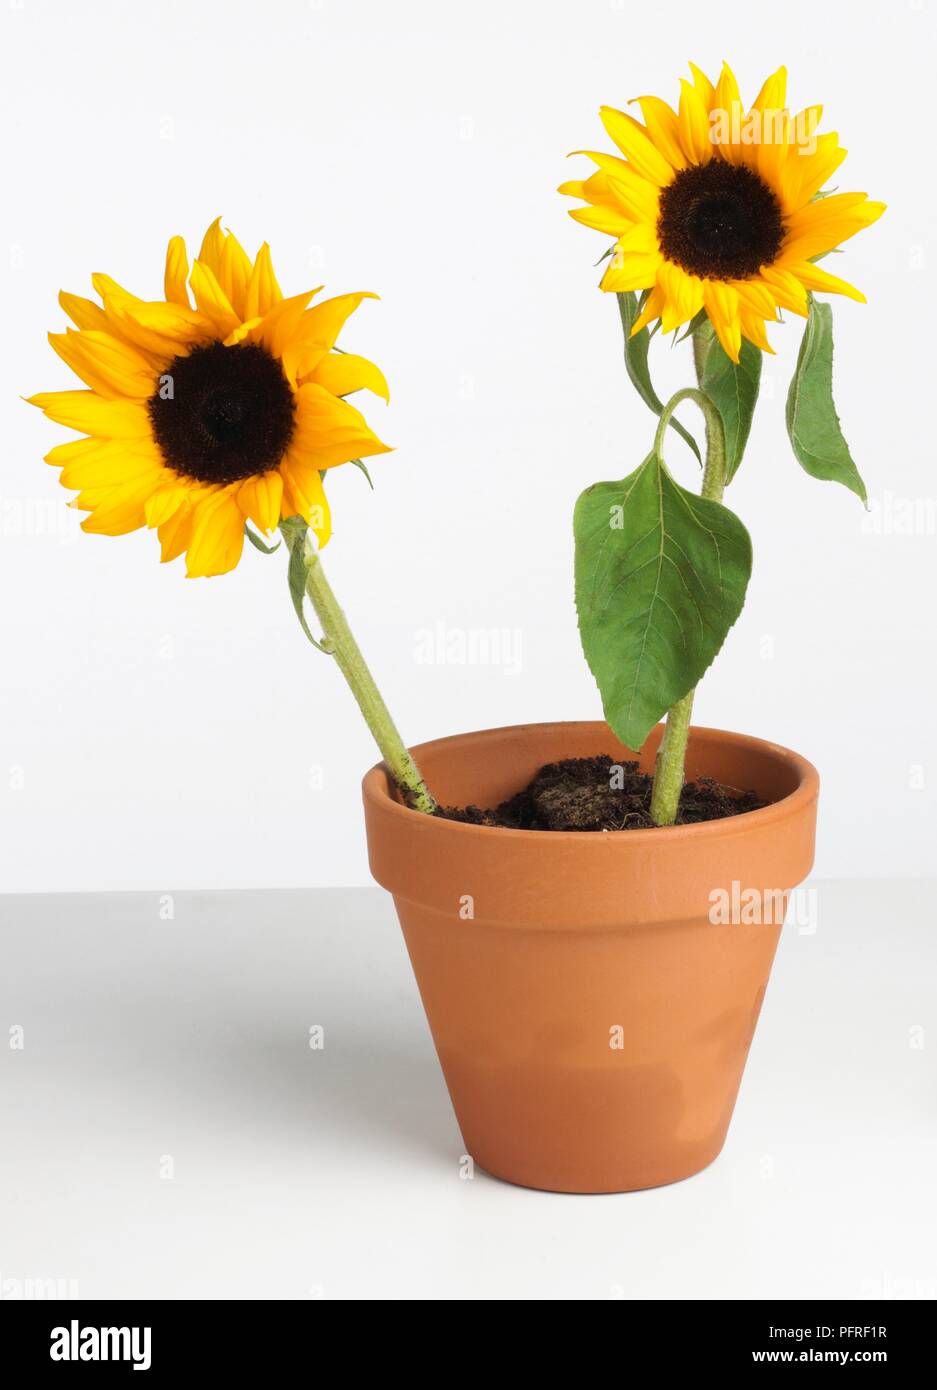 Two sunflowers in plant pot Stock Photo